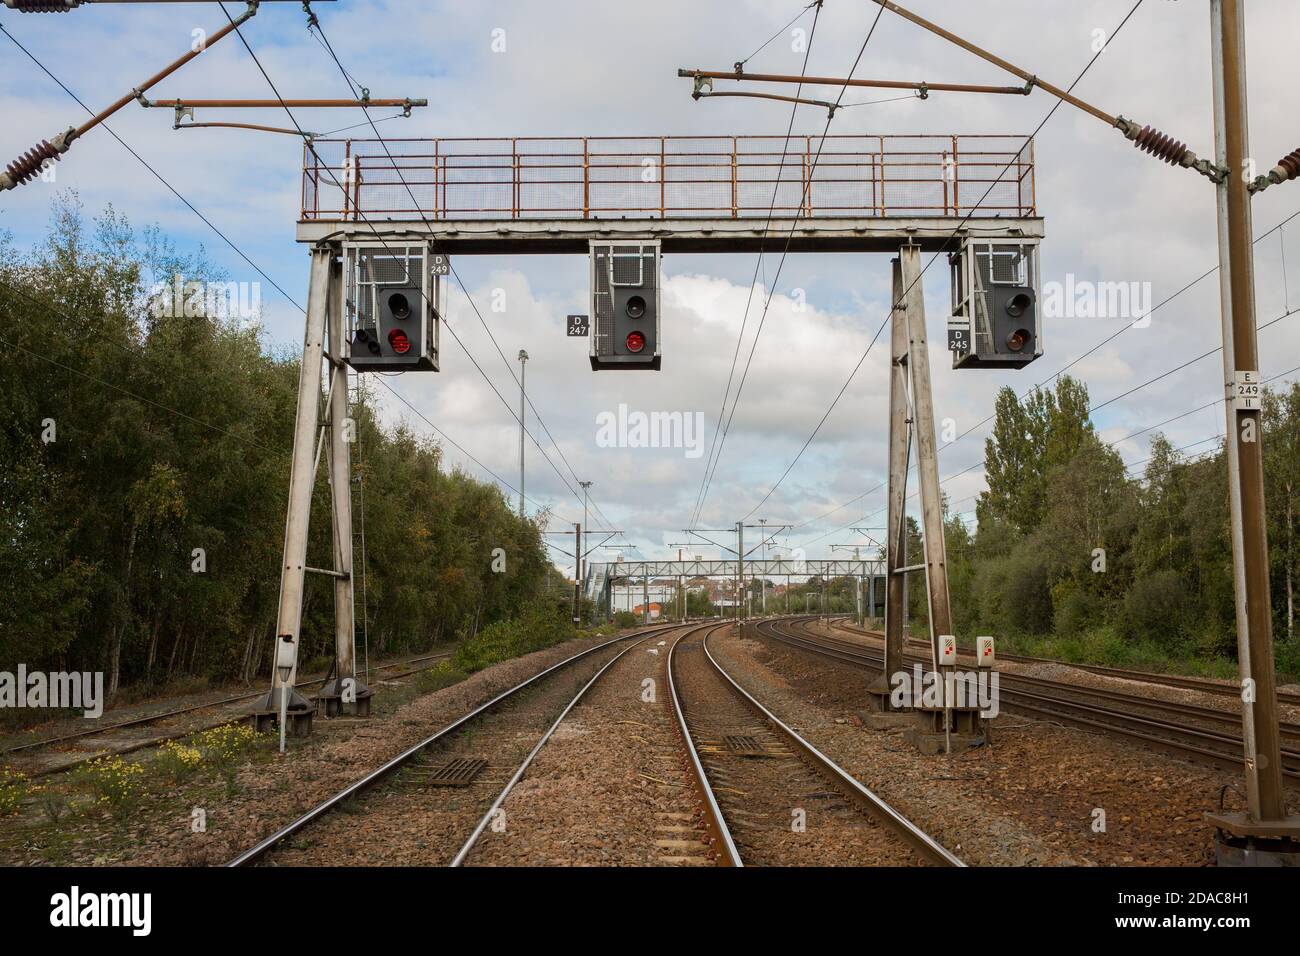 A row of overhead and gantry railway signals that control the movement of trains On UK electrified railway Stock Photo